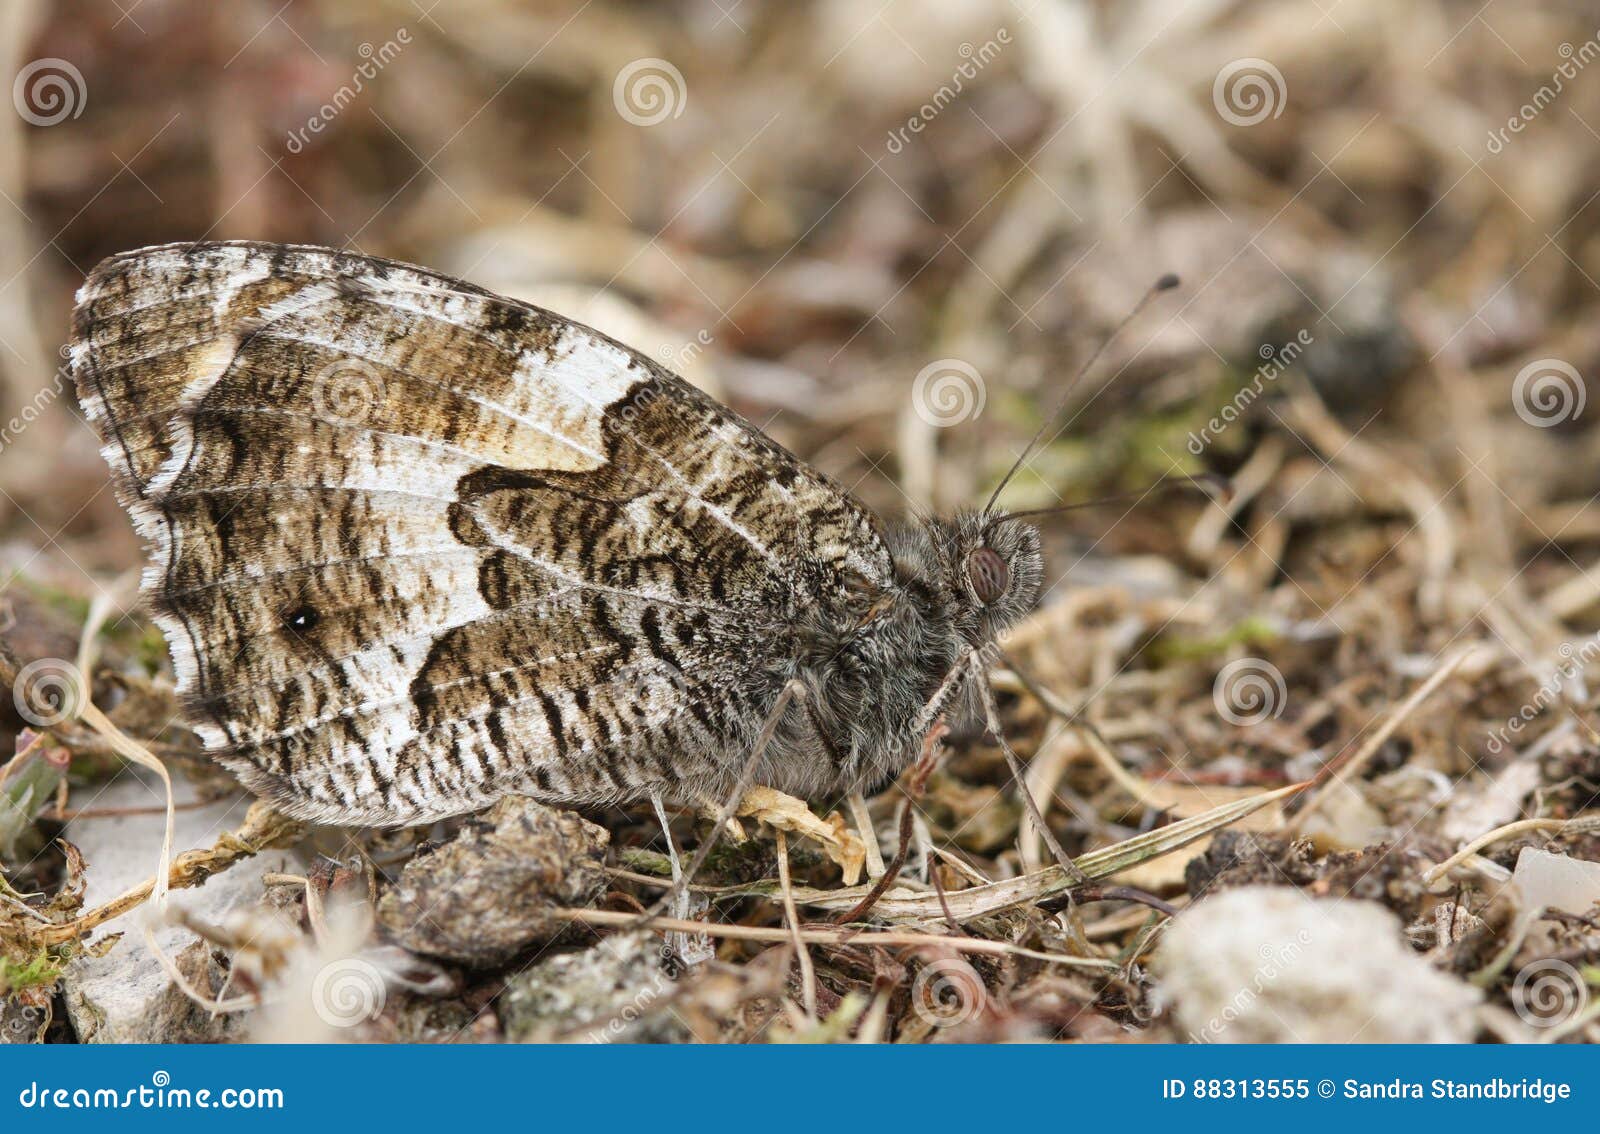 the side view of a grayling butterfly, hipparchia semele perched on the ground with its wings closed.